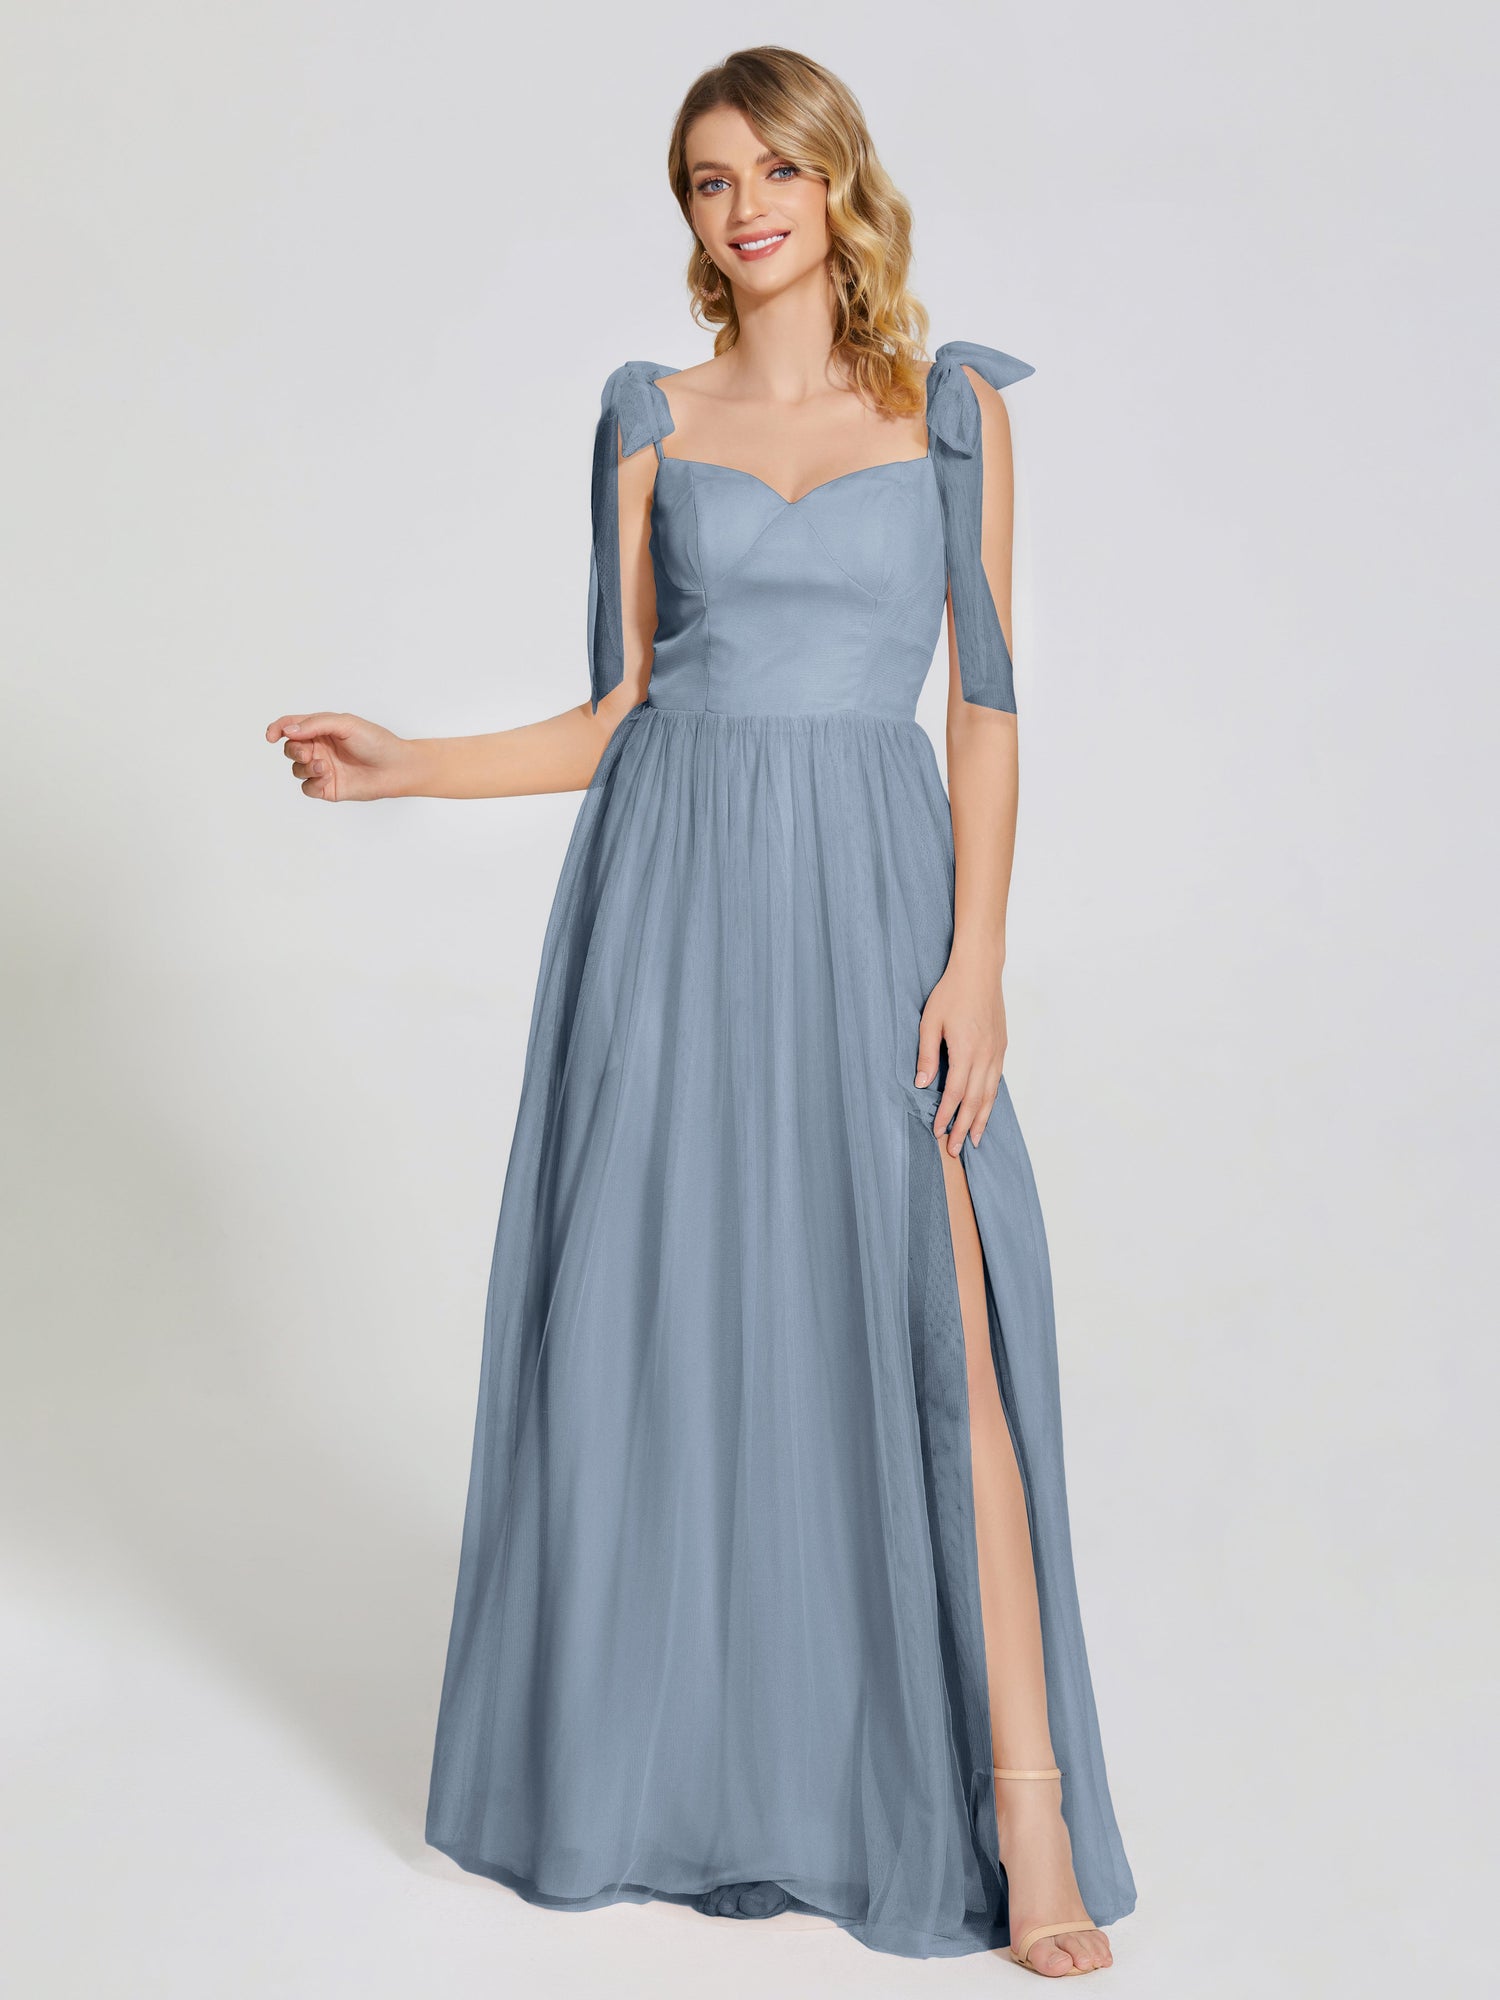 Long satin dress with bow, shoulder strap and slit